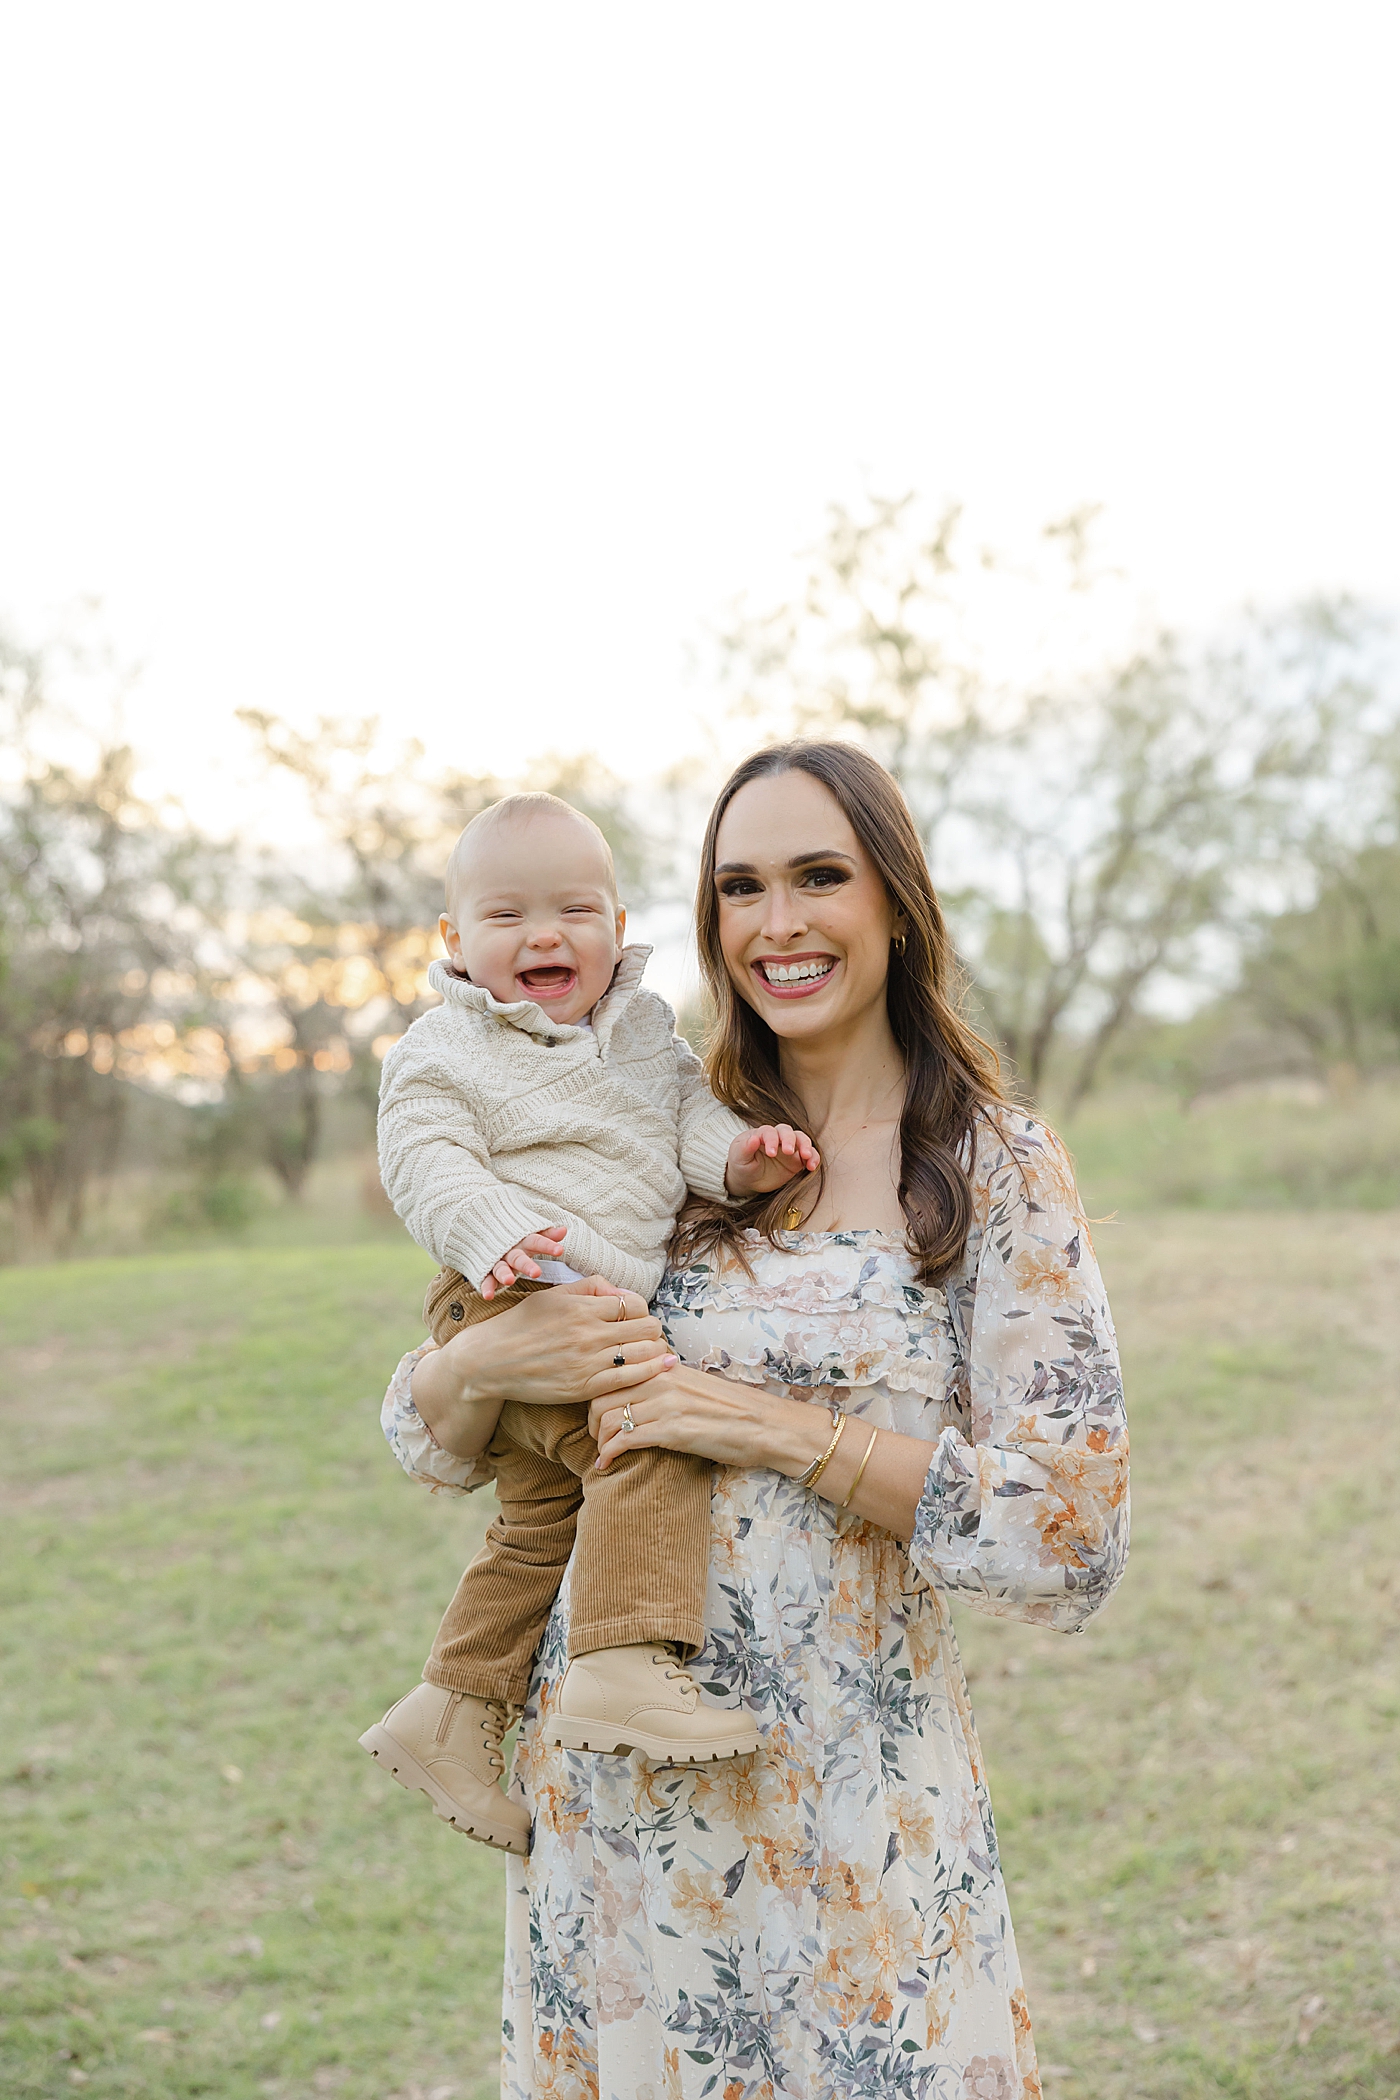 Mom and baby smiling during their Spring Family Sessions in Austin | Image by Sana Ahmed Photography